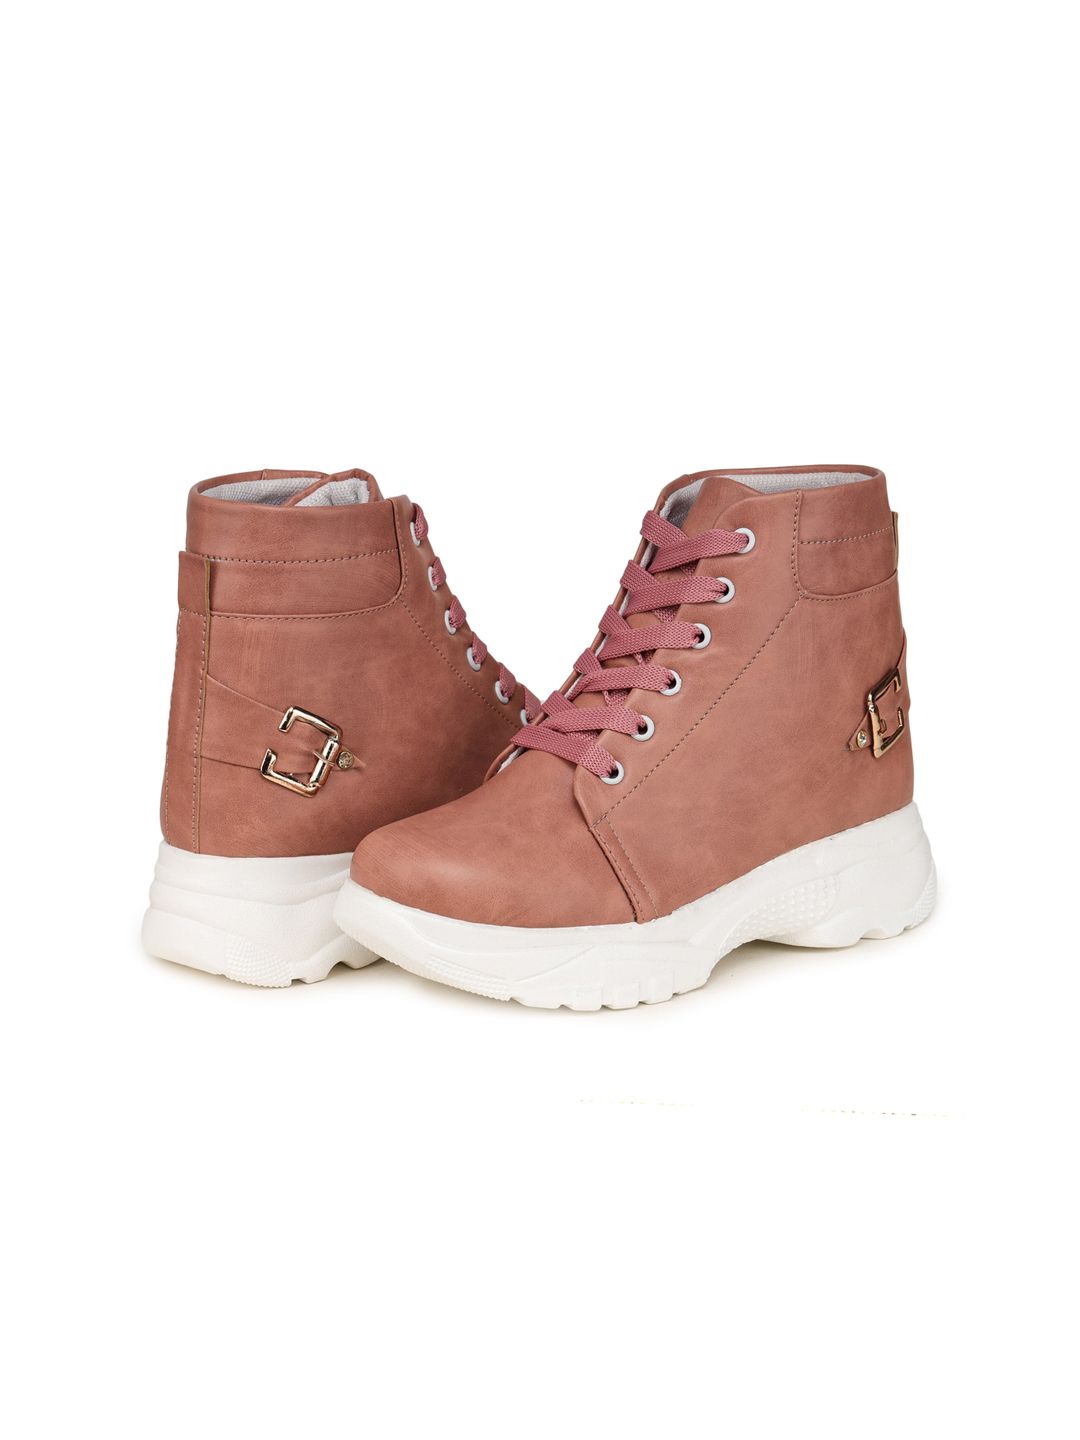 BOOTCO Women Pink Light Weight Heeled Boots Ankle Length With Laces and Buckle Charm Price in India